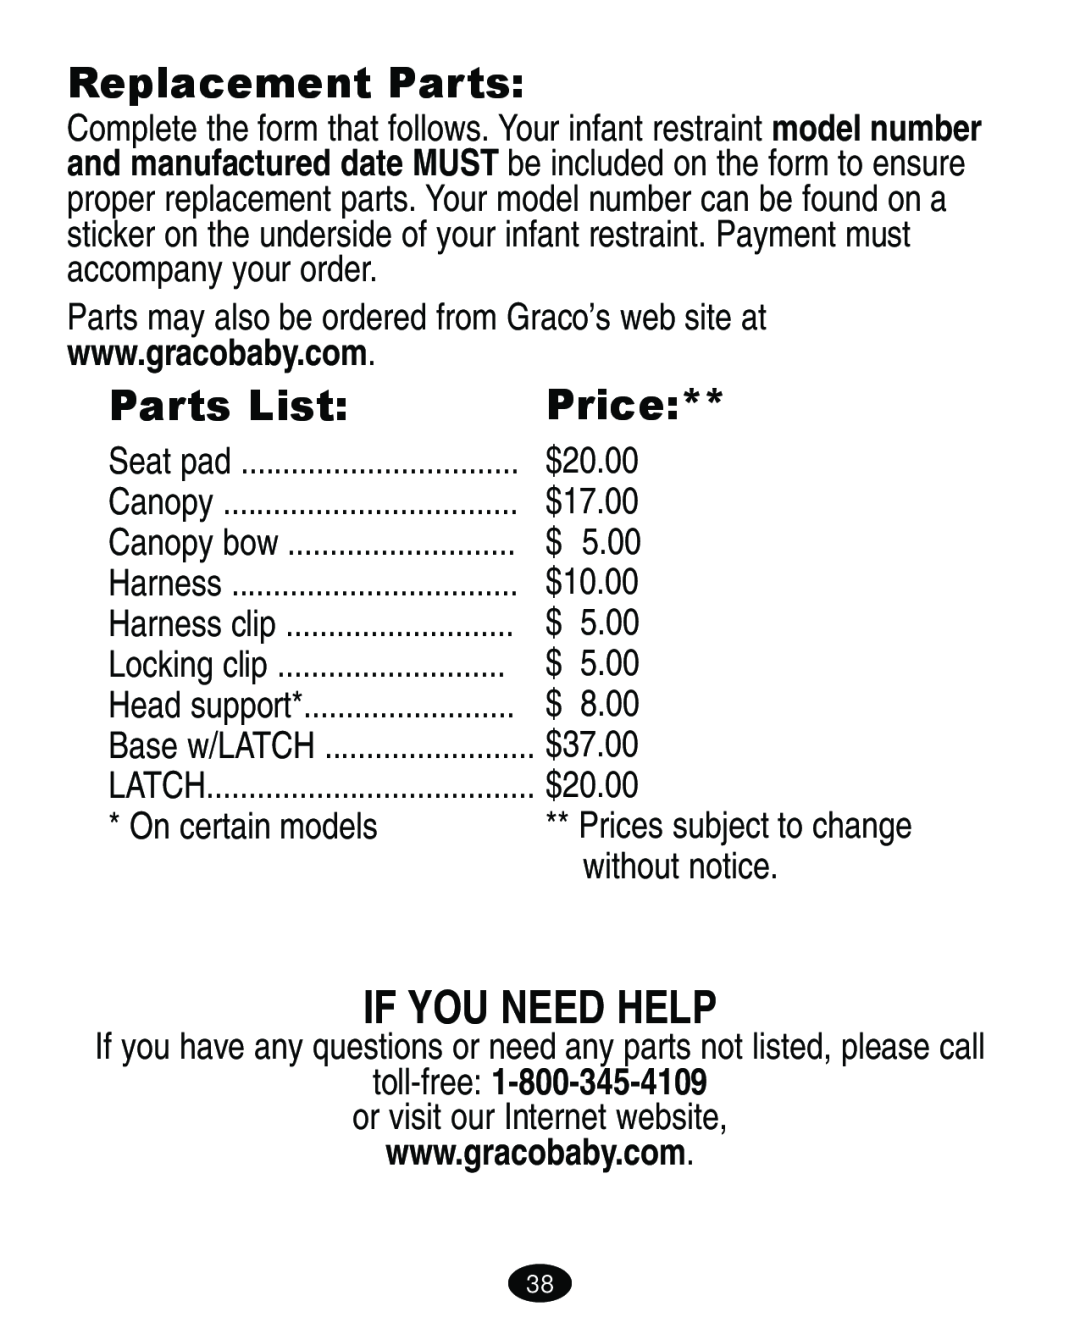 Graco ISPA113AA If You Need Help, Replacement Parts, Parts List, Price, 5.00, 8.00, On certain models, without notice 